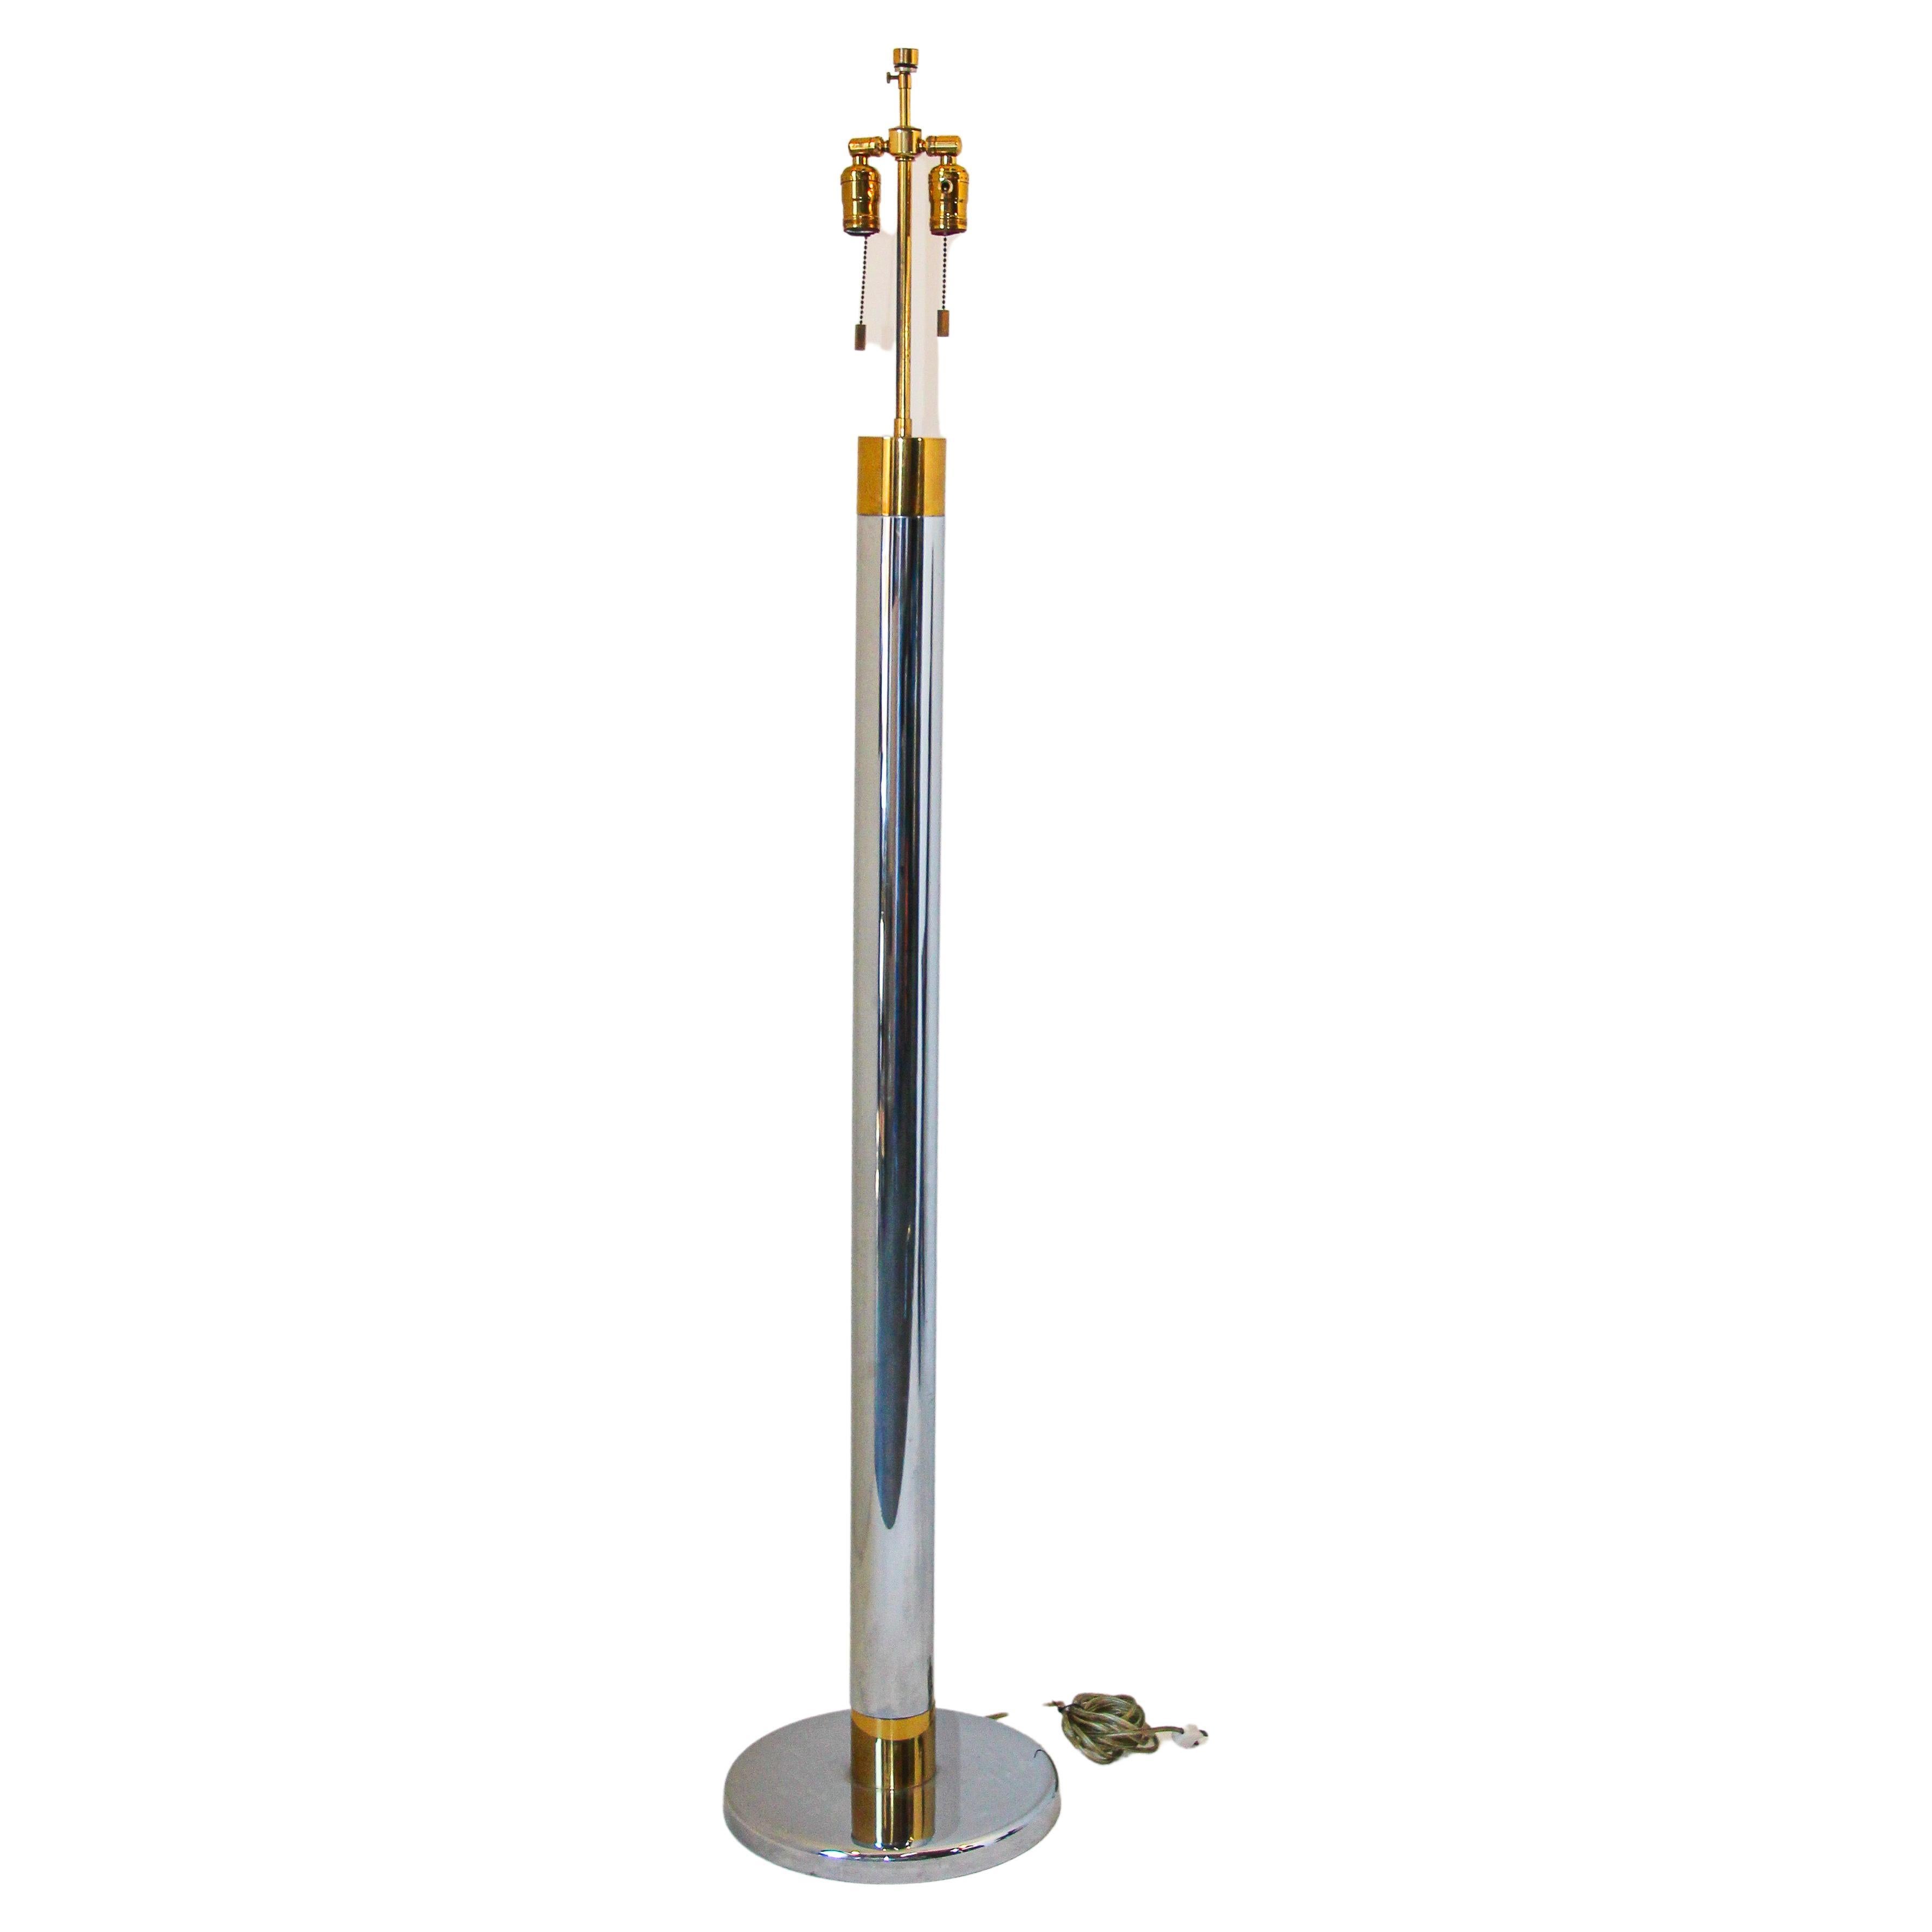 Midcentury Vintage Italian Bicolor Chrome and Brass 1970s Tall Floor Lamp For Sale